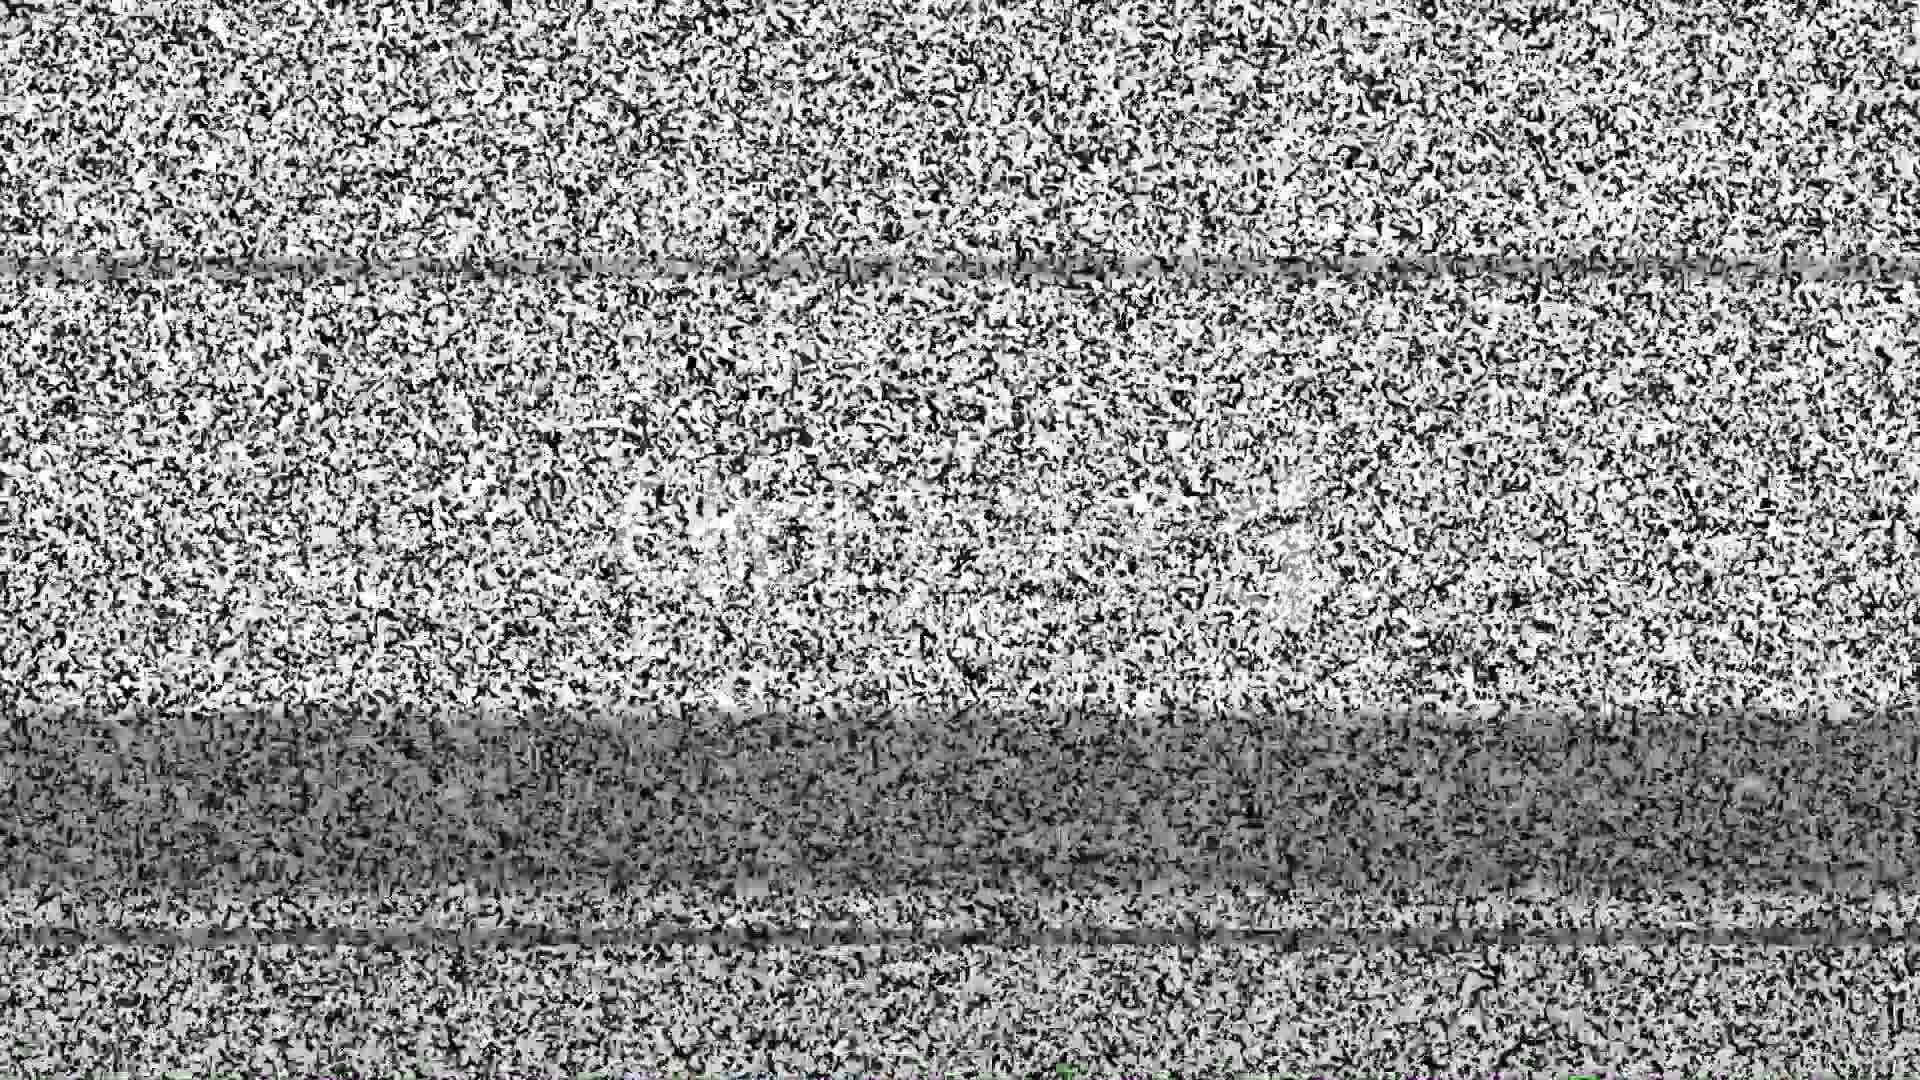 A Black And White Image Of A Television Screen